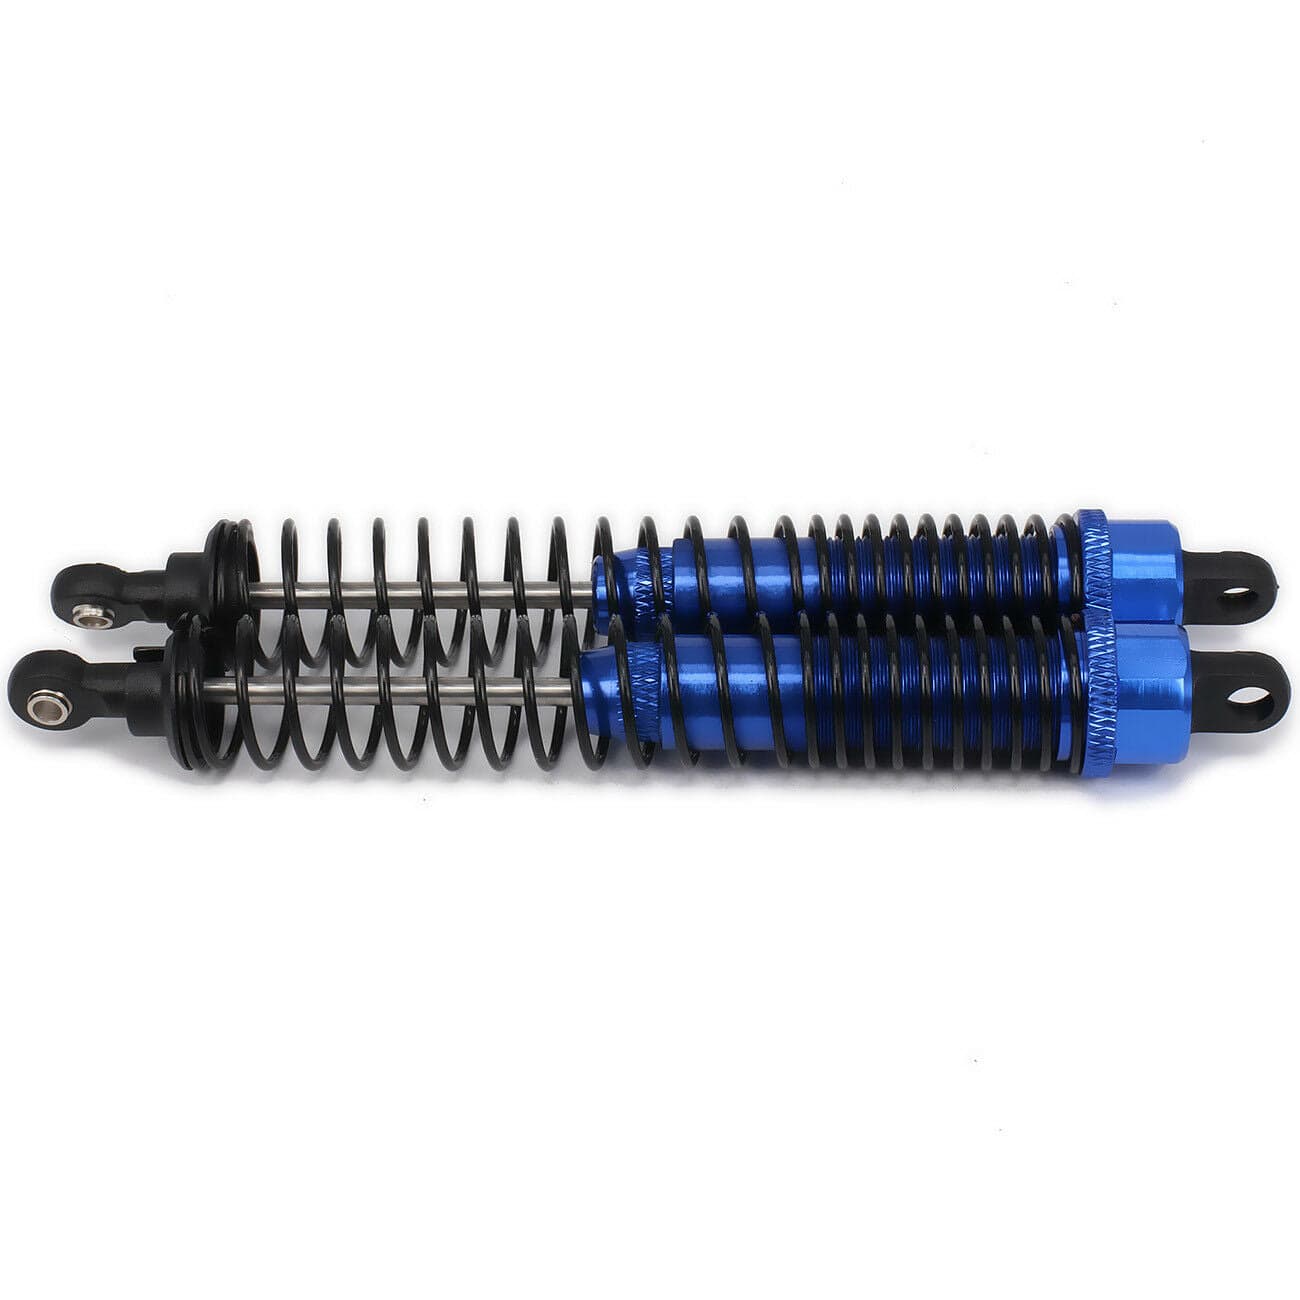 RCAWD RC CAR UPGRADE PARTS Dark Blue RCAWD Adjustable 130mm RC Shock Absorber Damper For RC Car 1/10 Model Car 2PCS